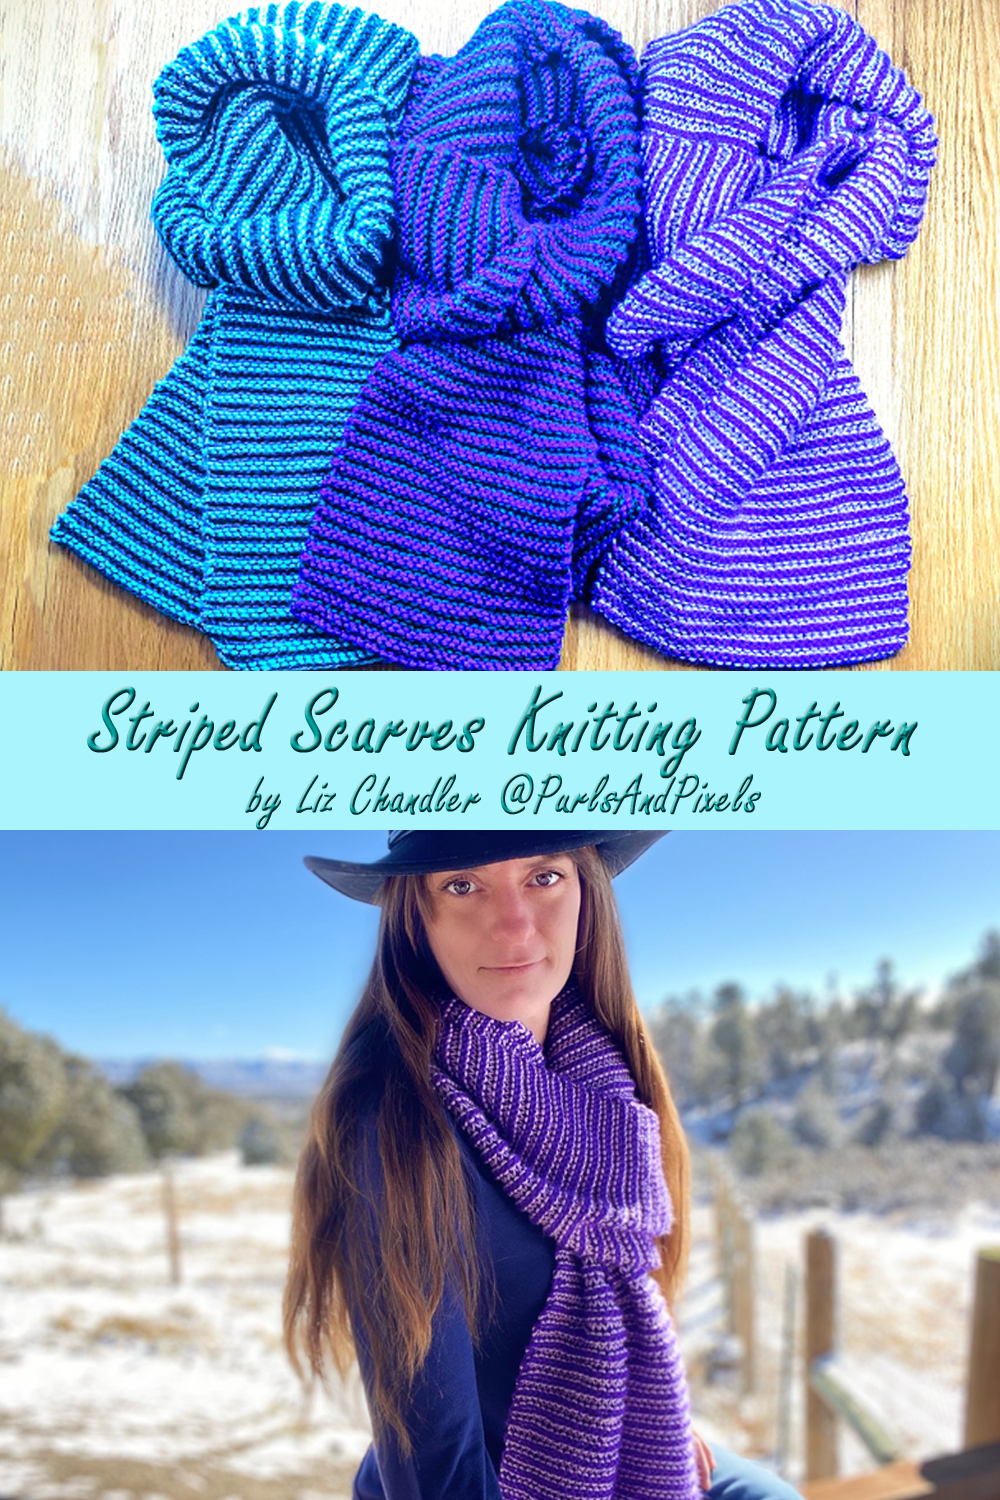 Learn to knit single-row striped scarves with two colors of yarn in this knitting pattern by Liz Chandler @PurlsAndPixels.